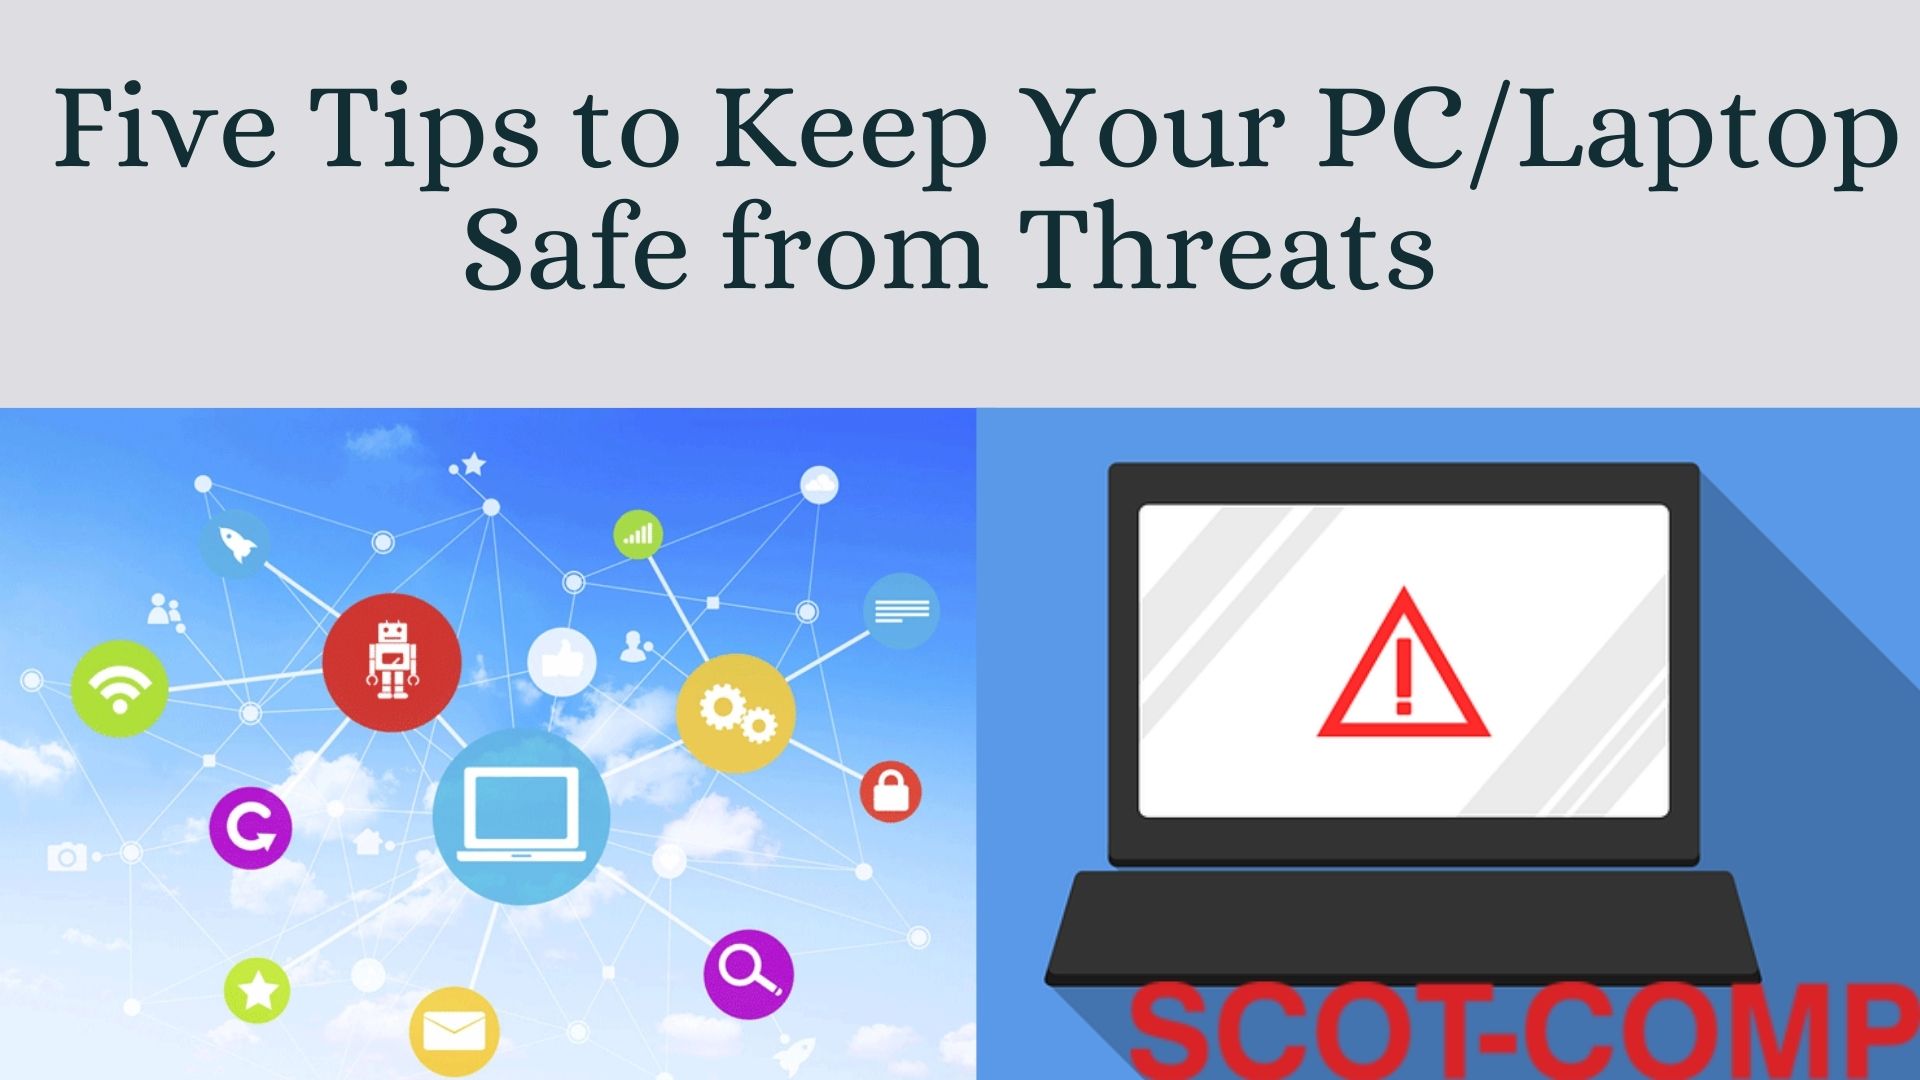 Tips to Keep Your PC/Laptop Safe from Threats